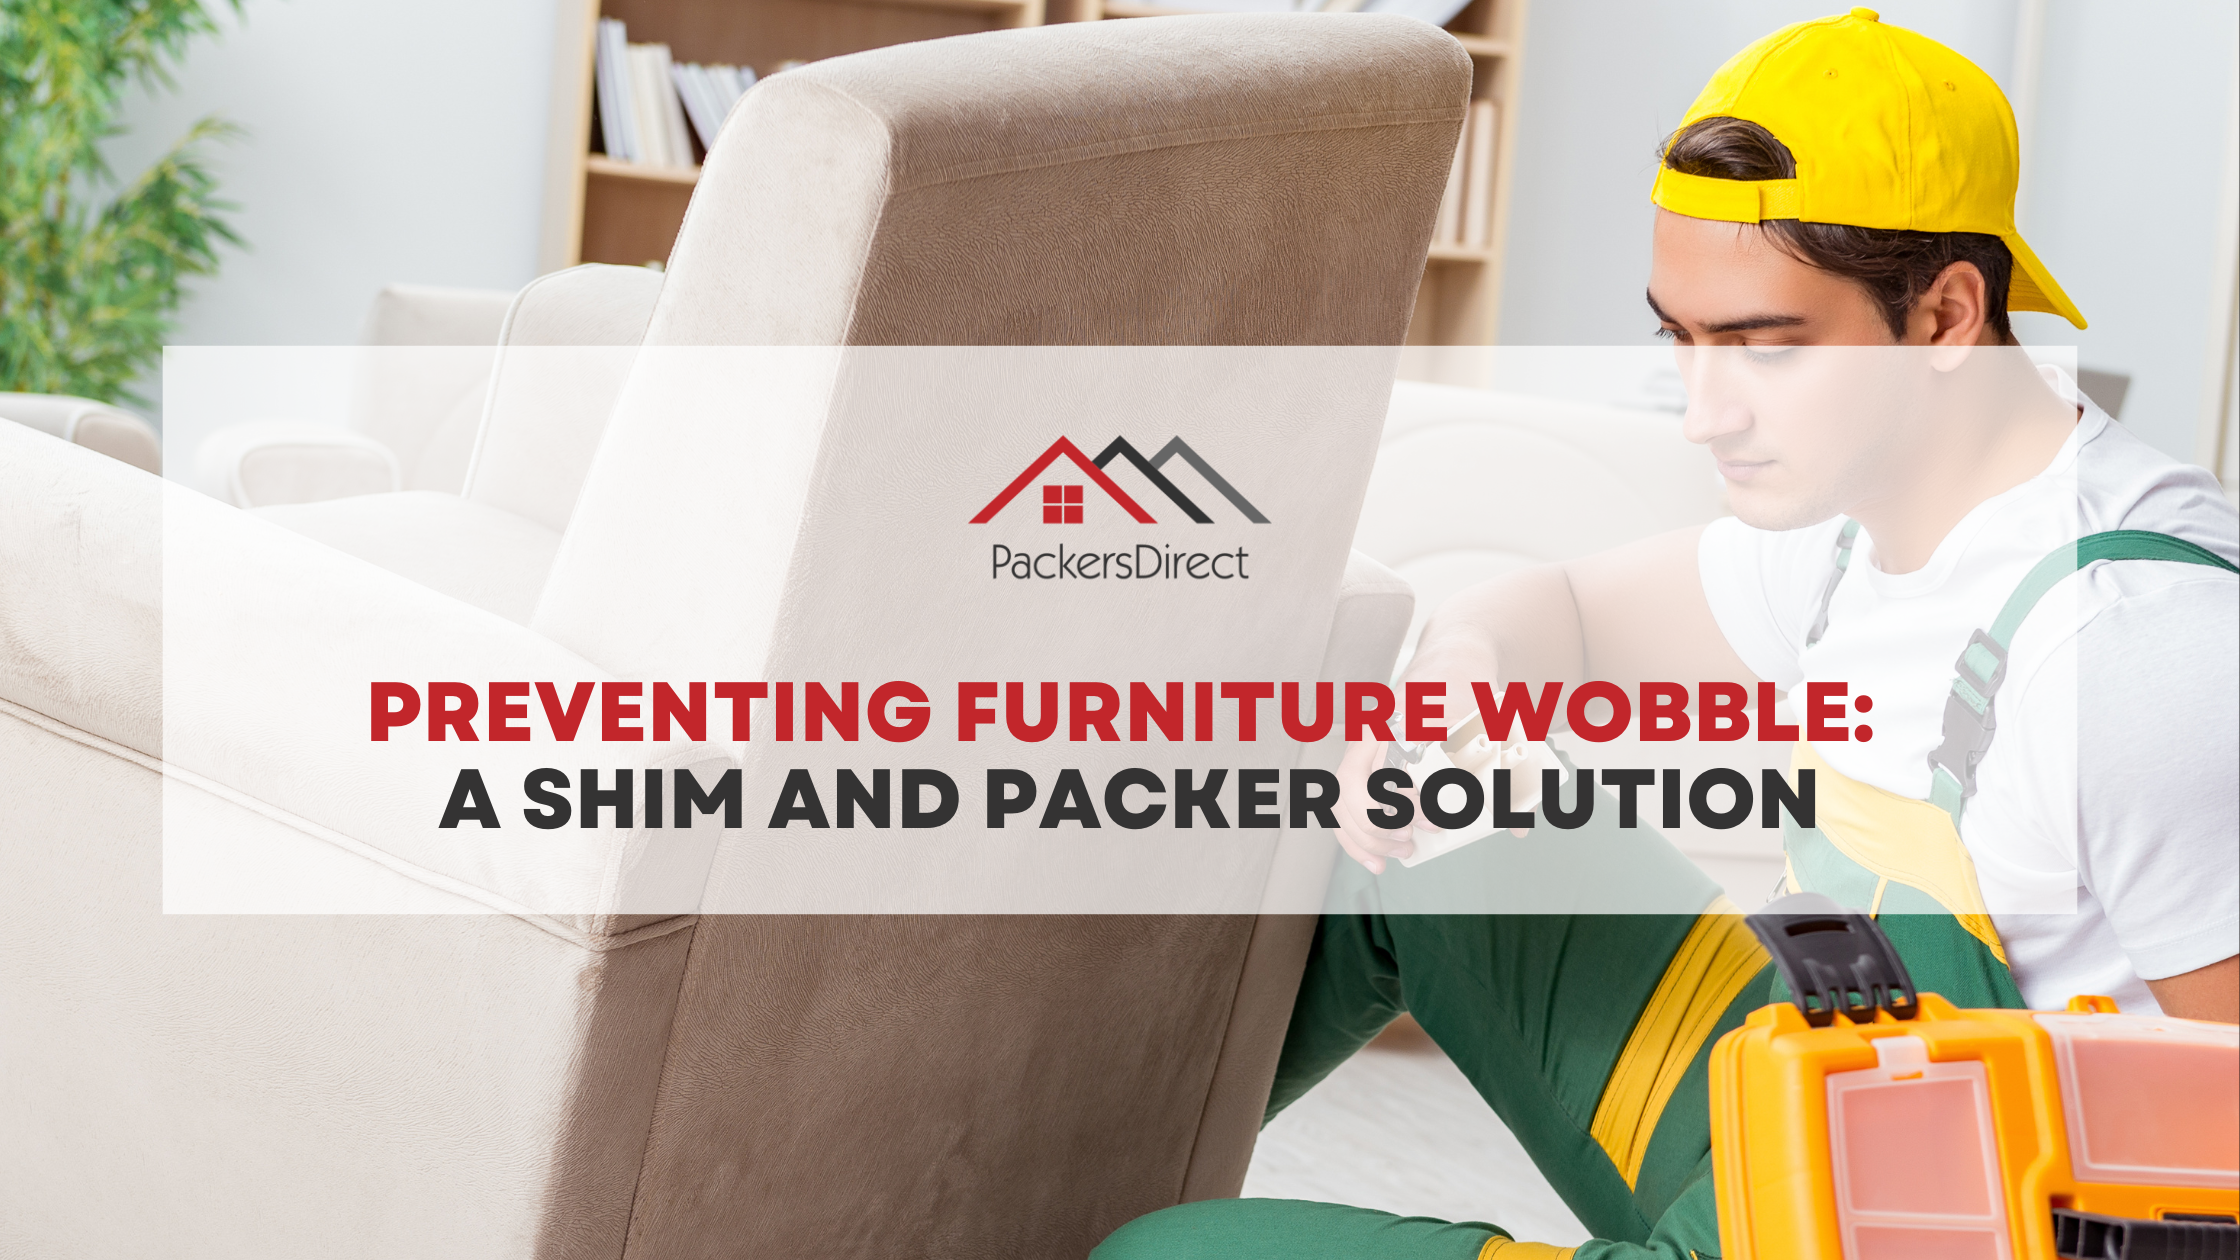 Preventing Furniture Wobble: A Shim and Packer Solution